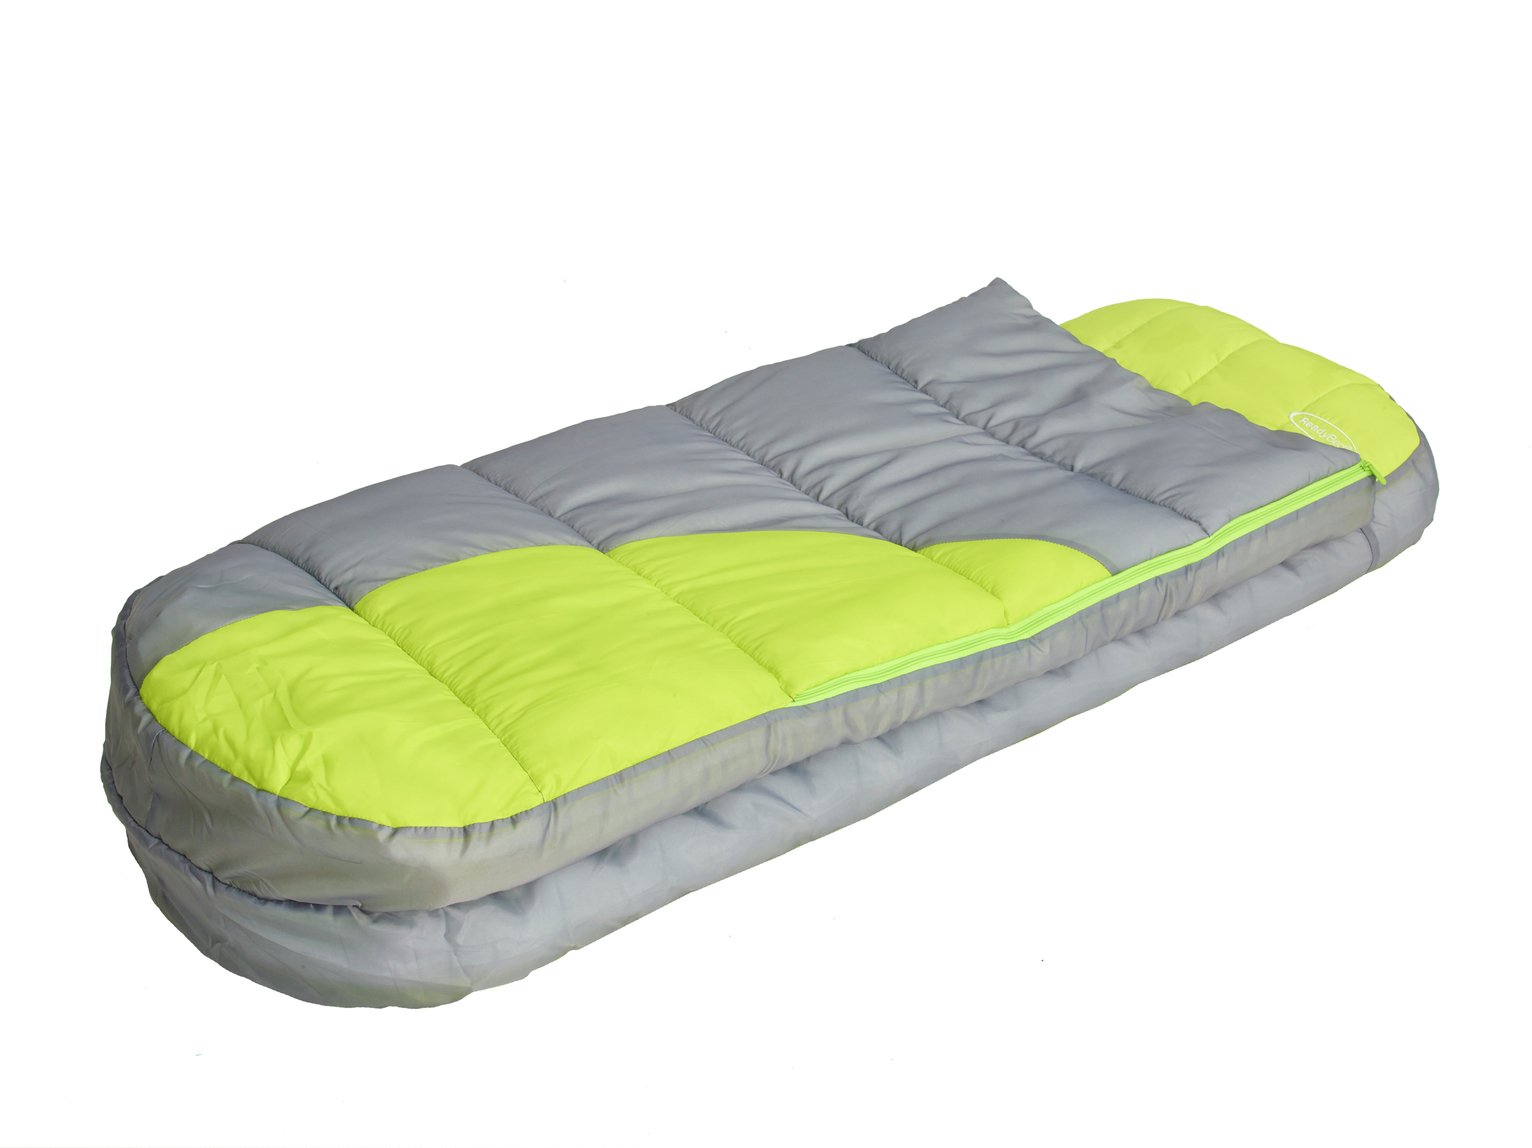 ReadyBed Junior Inflatable Camping Air Bed and Sleeping Bag (2978192), Argos Price Tracker